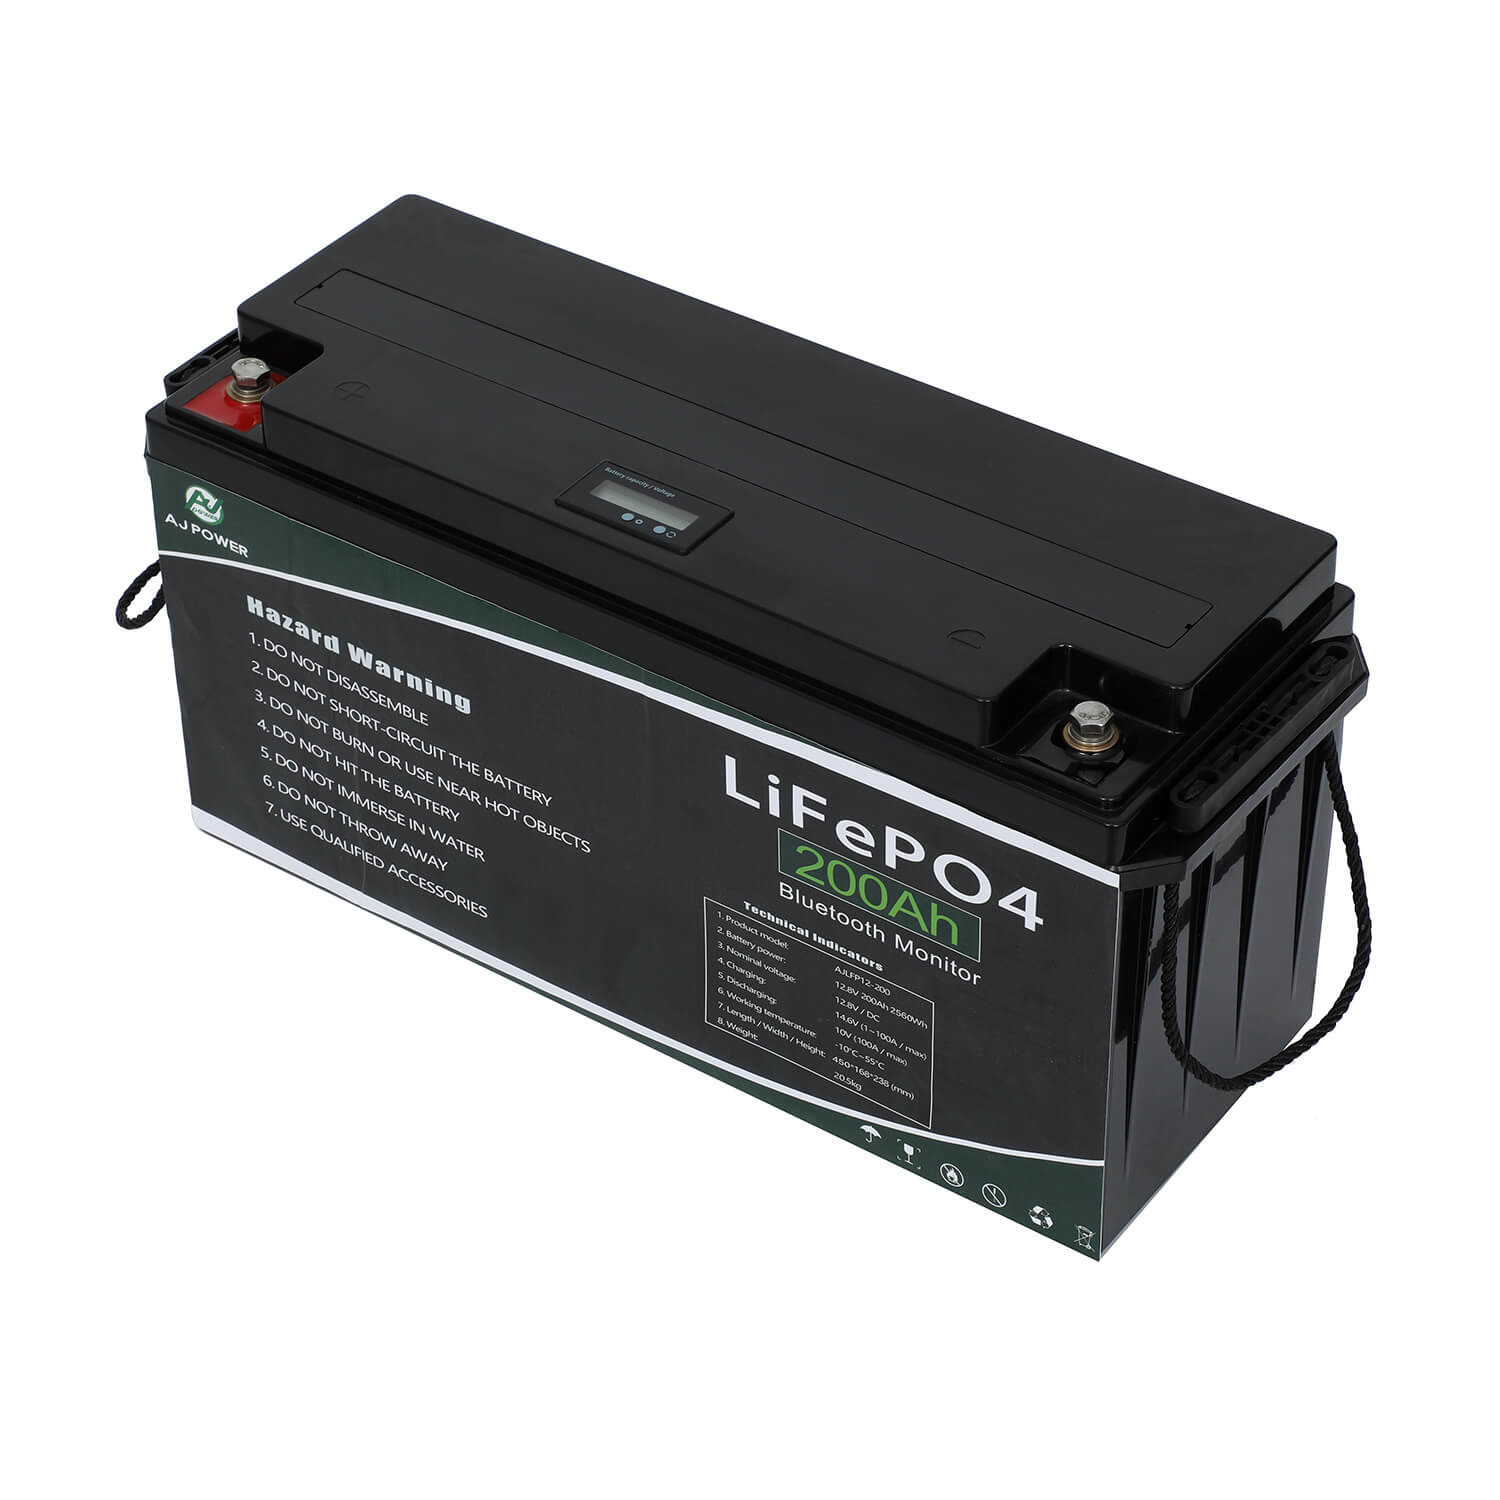 12V 200Ah battery for sustainable power storage